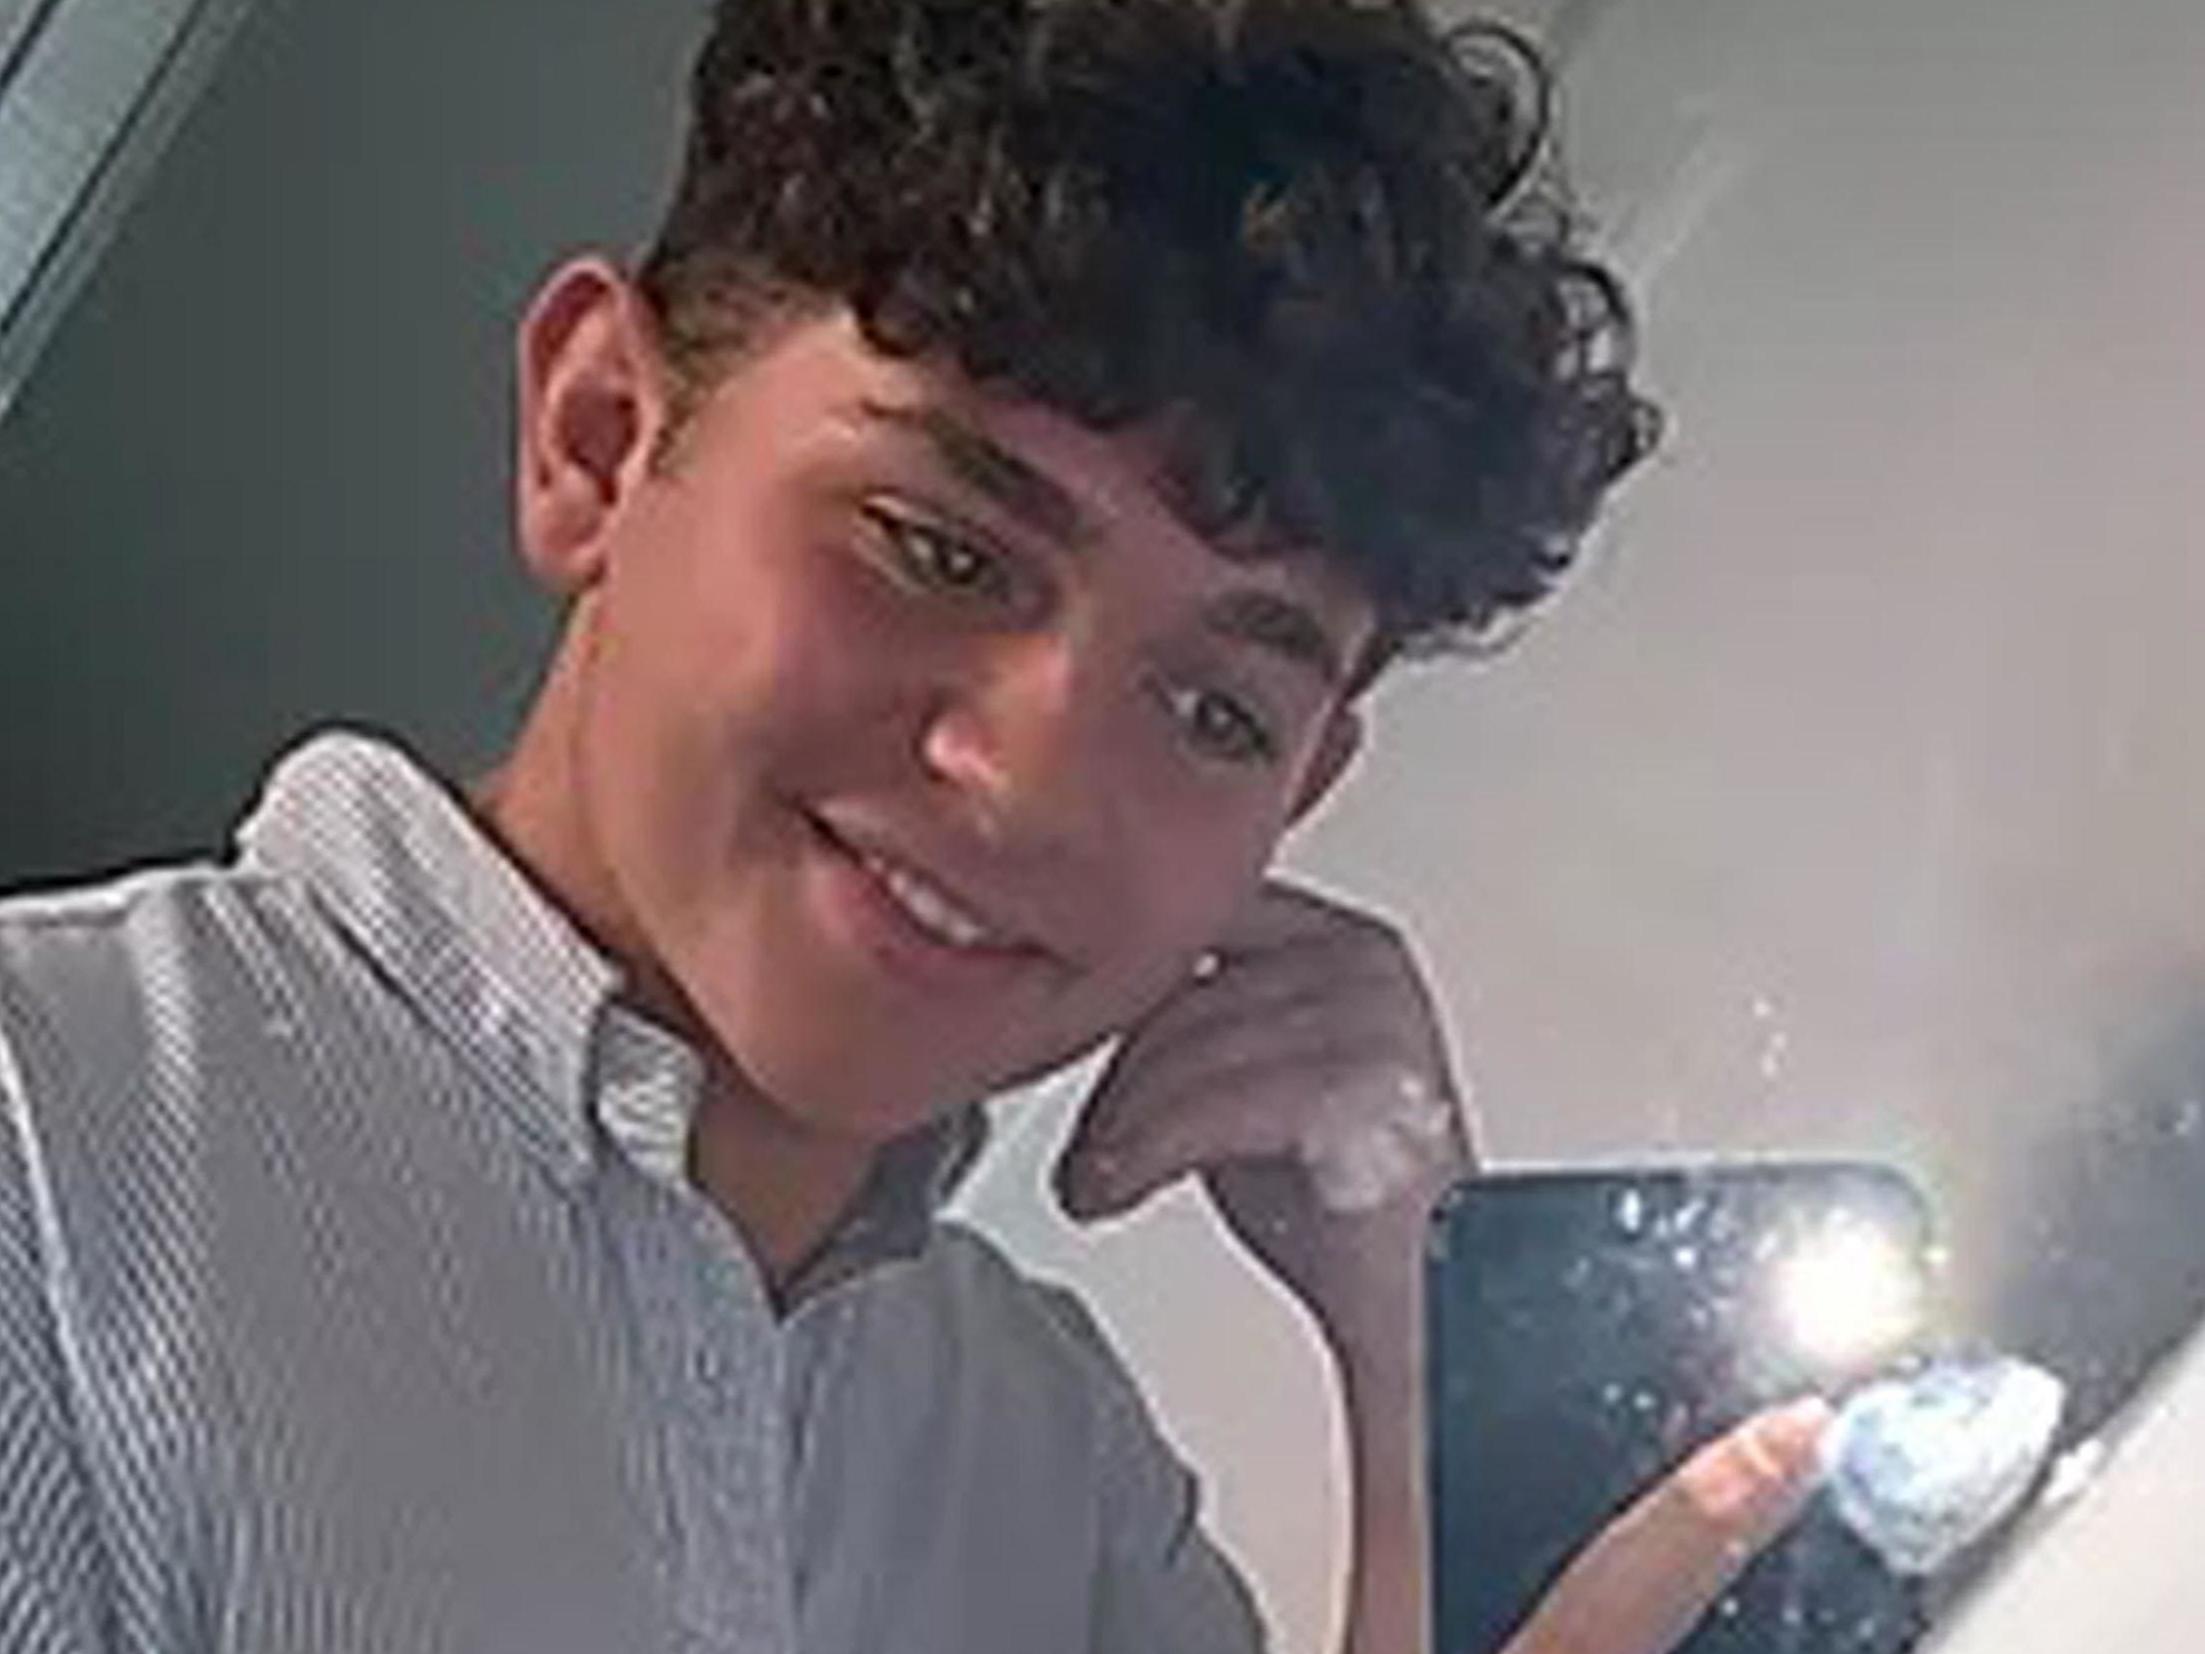 Alex Rodda, 15, from Knutsford, was found dead outside in Ashley Mill Lane, Ashley, Cheshire, shortly before 8am on Friday